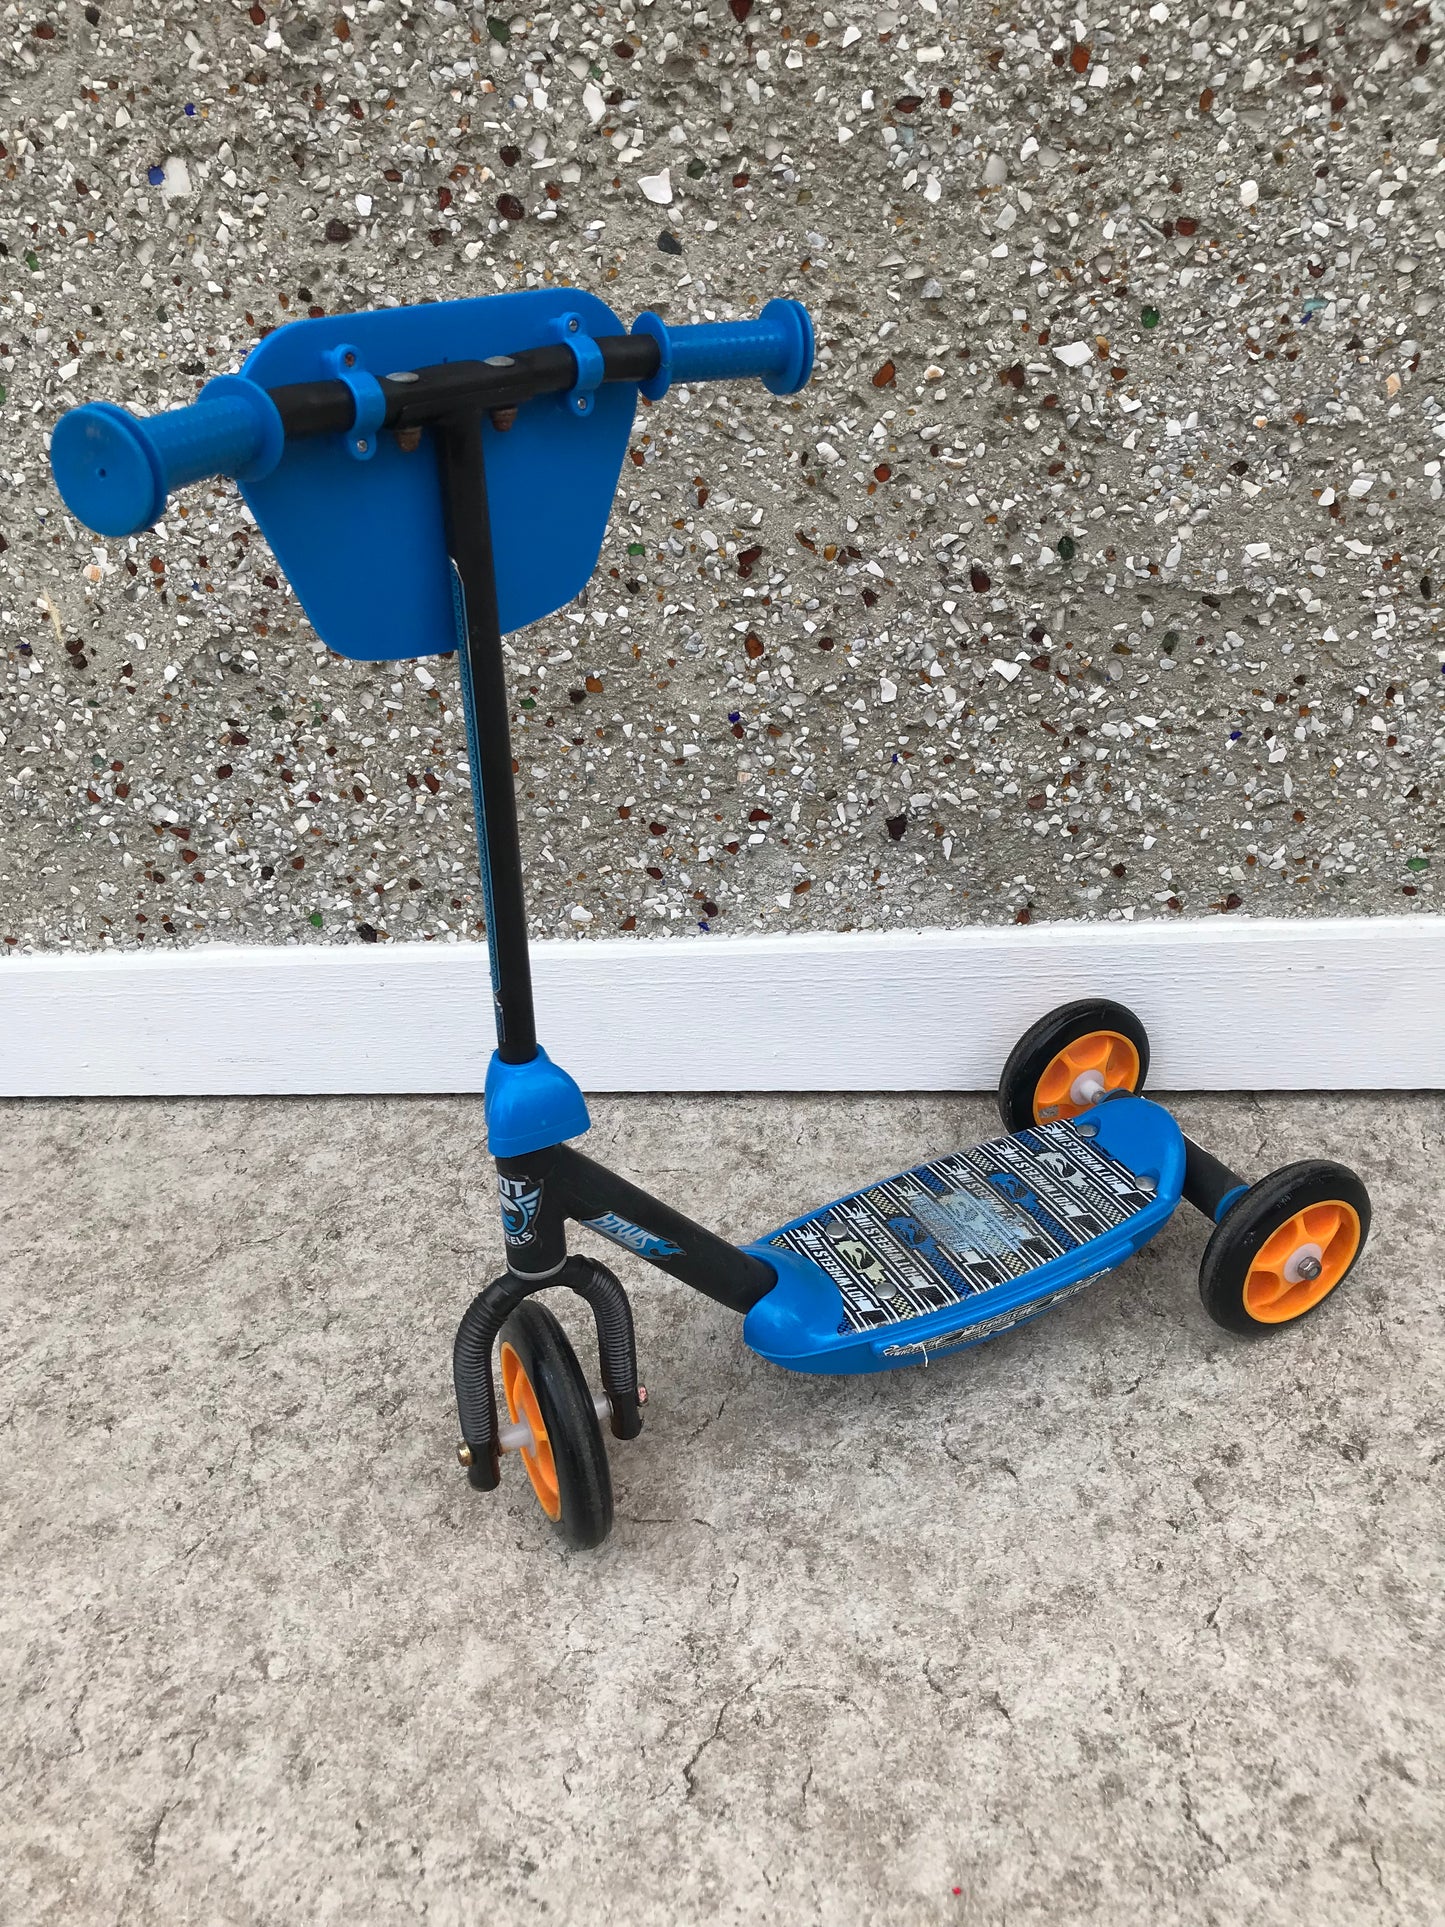 Scooter Child Size 4-7 Speed Racer 3 Wheels Blue Excellent